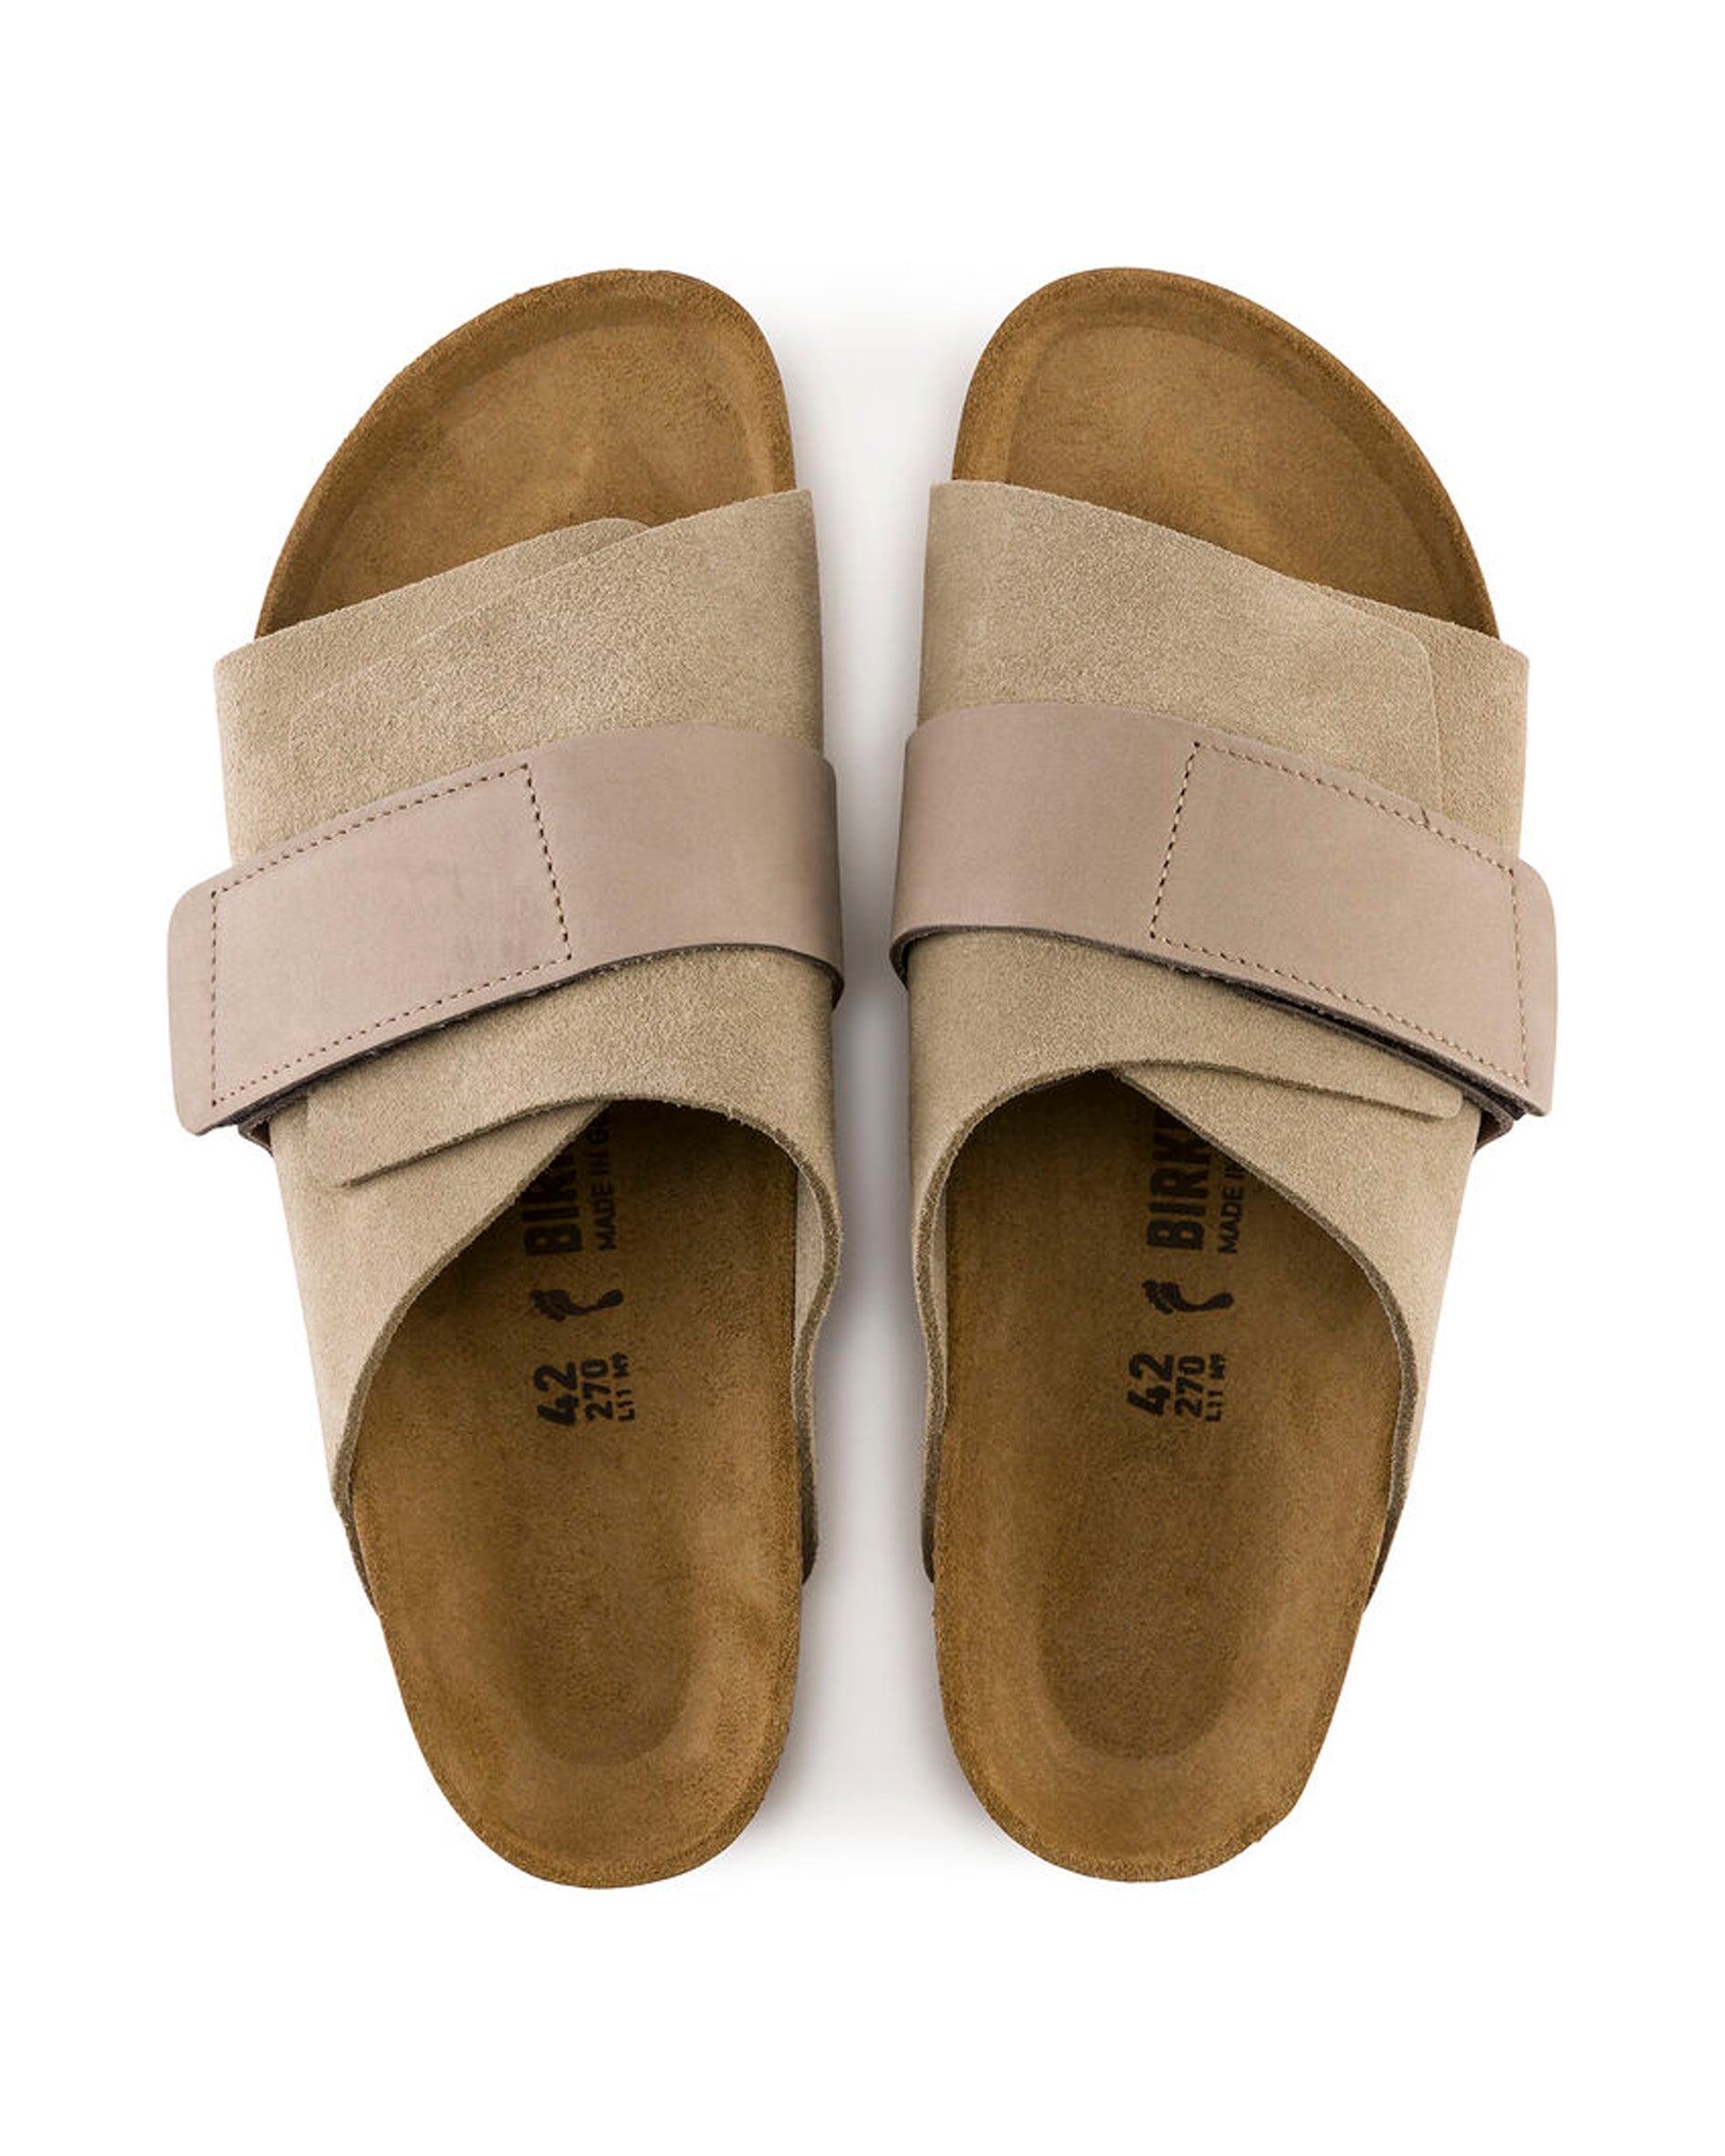 Kyoto Taupe Suede Leather Sandals